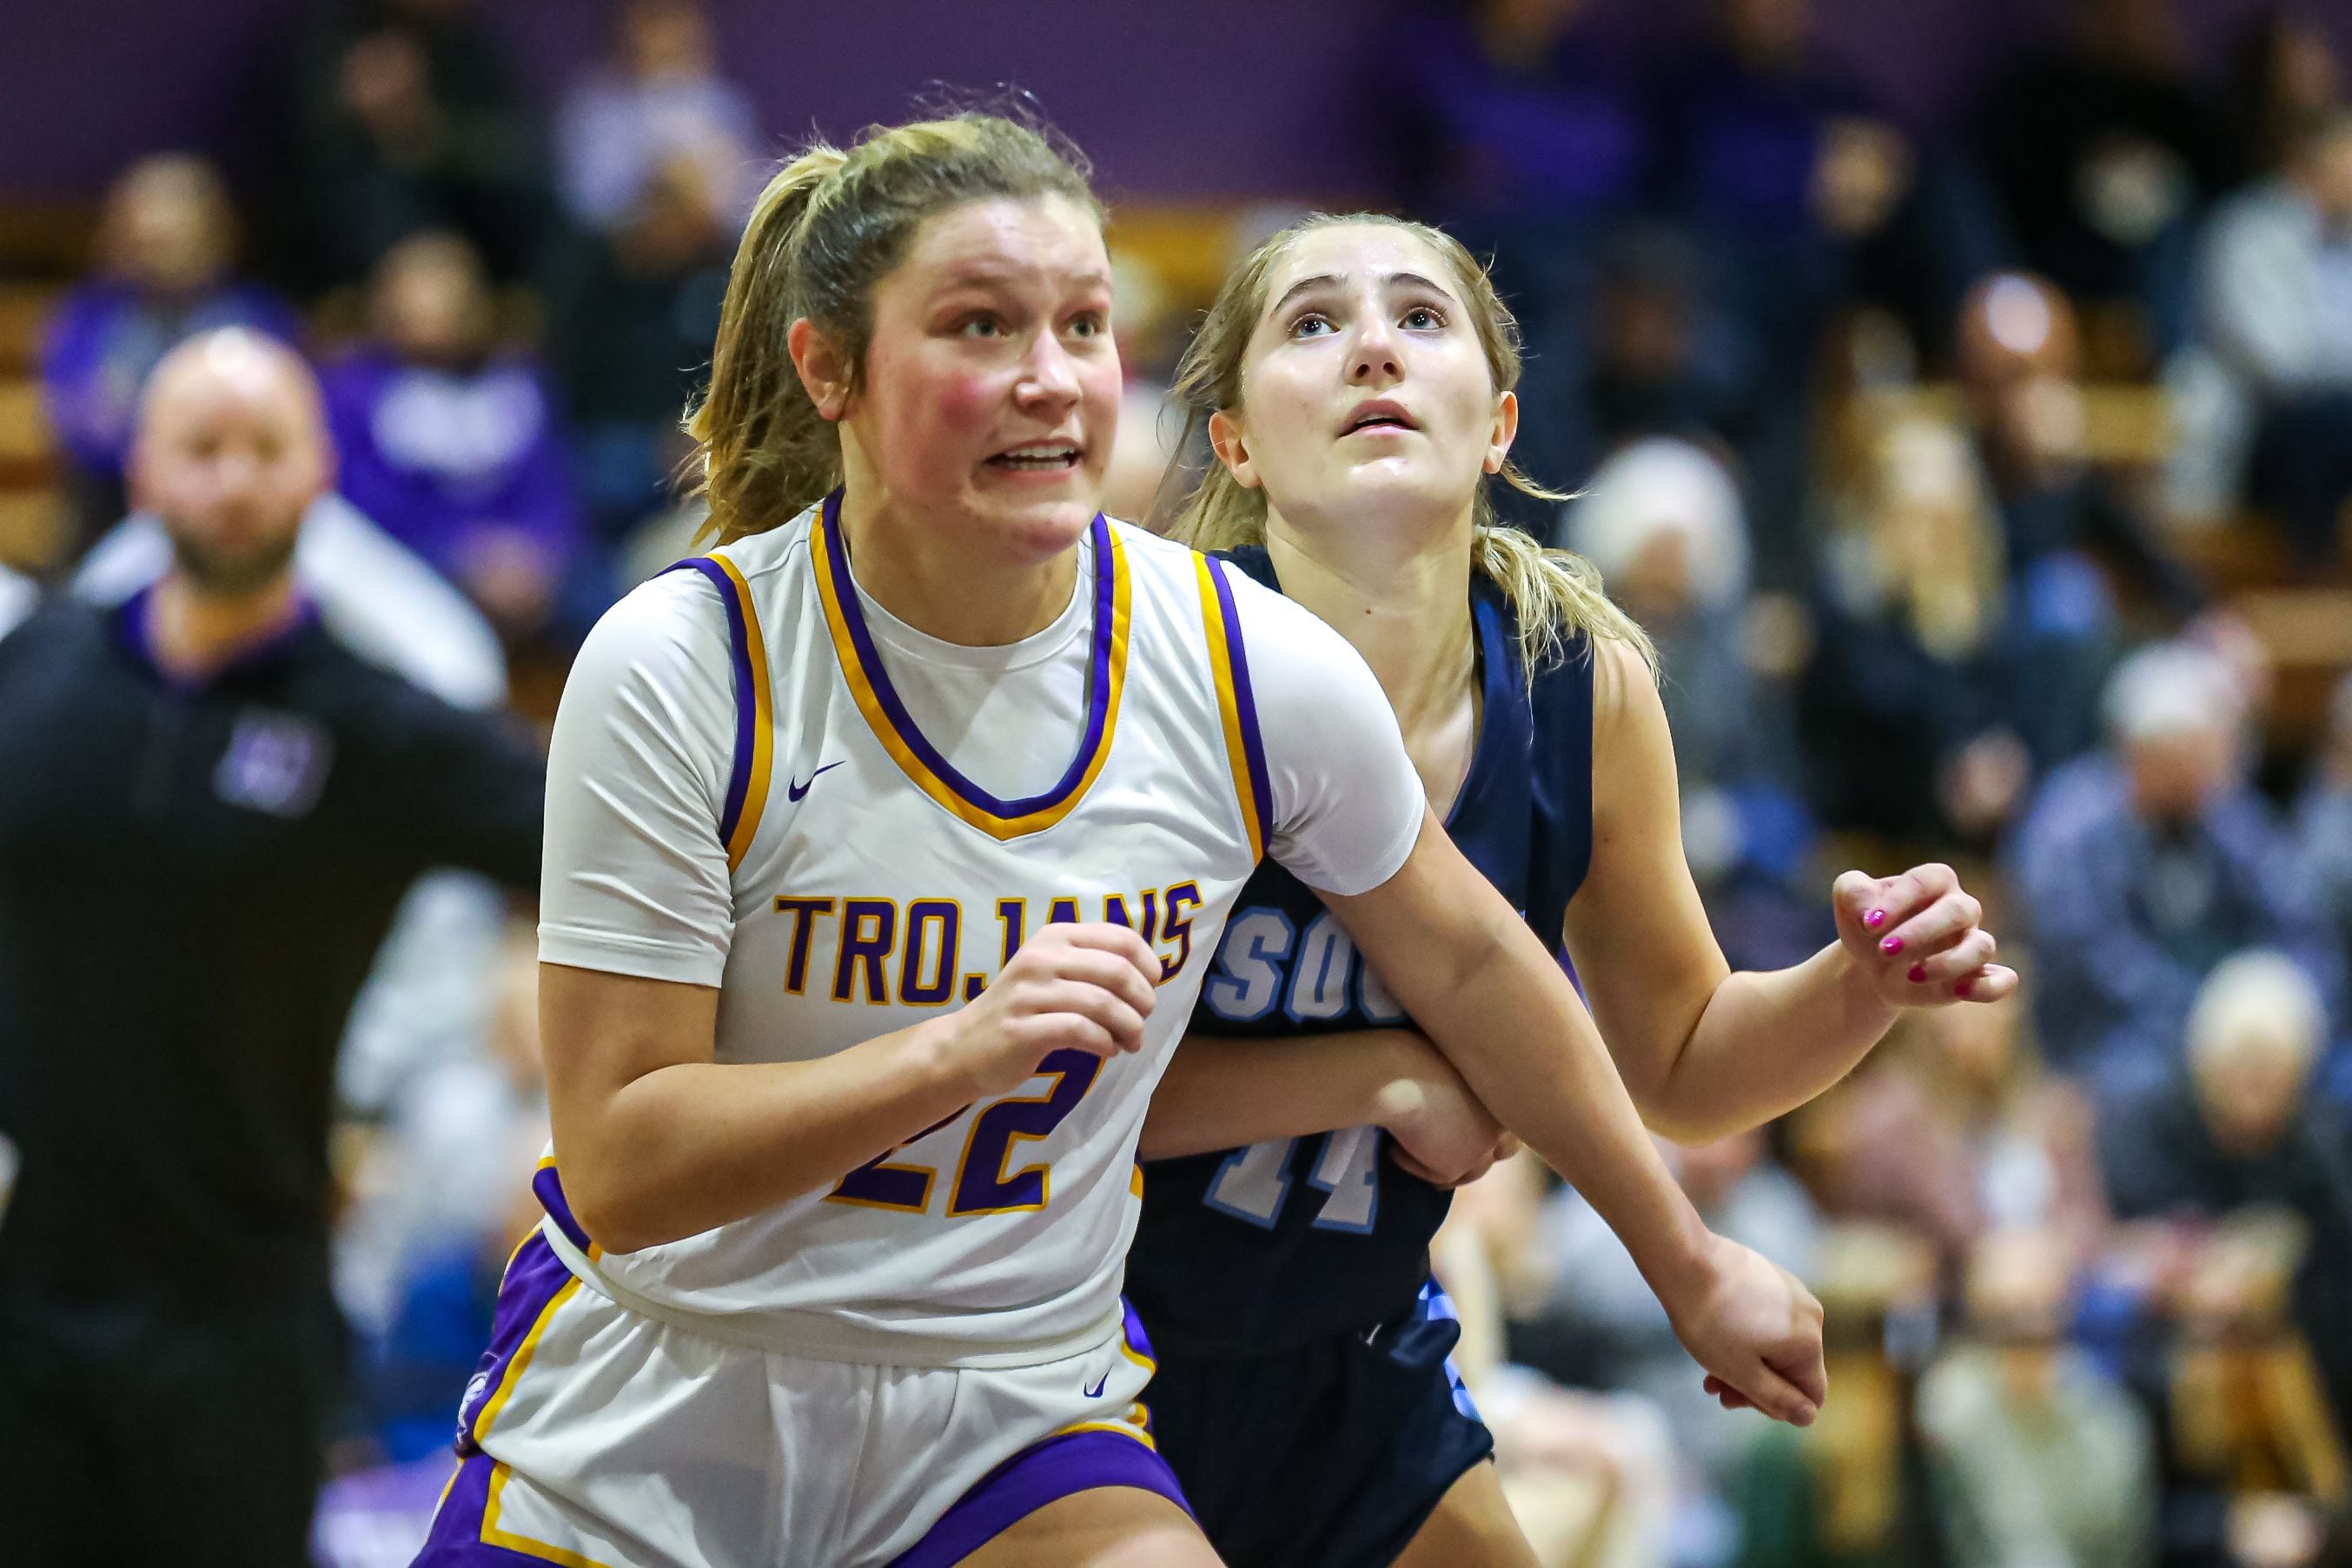 Downers Grove North's Lilly Boor (22) blocks out Downers Grove South's Allison Jarvis (14) at the free throw line during girls basketball game between Downers Grove South at Downers Grove North. Dec 16, 2023.